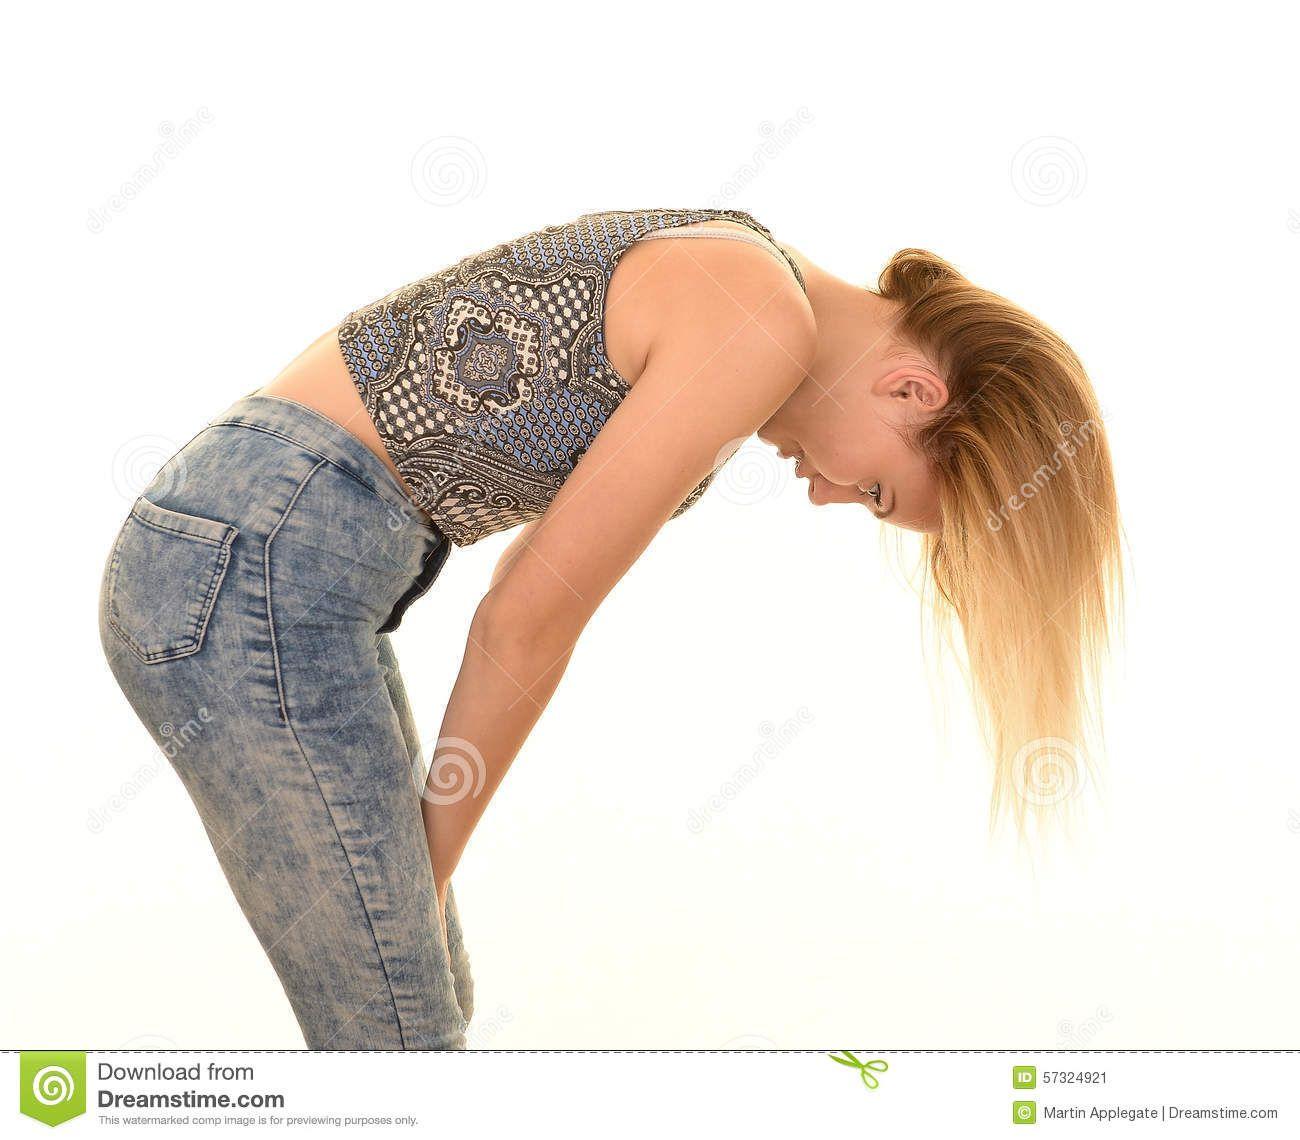 Jeans down bent over girls